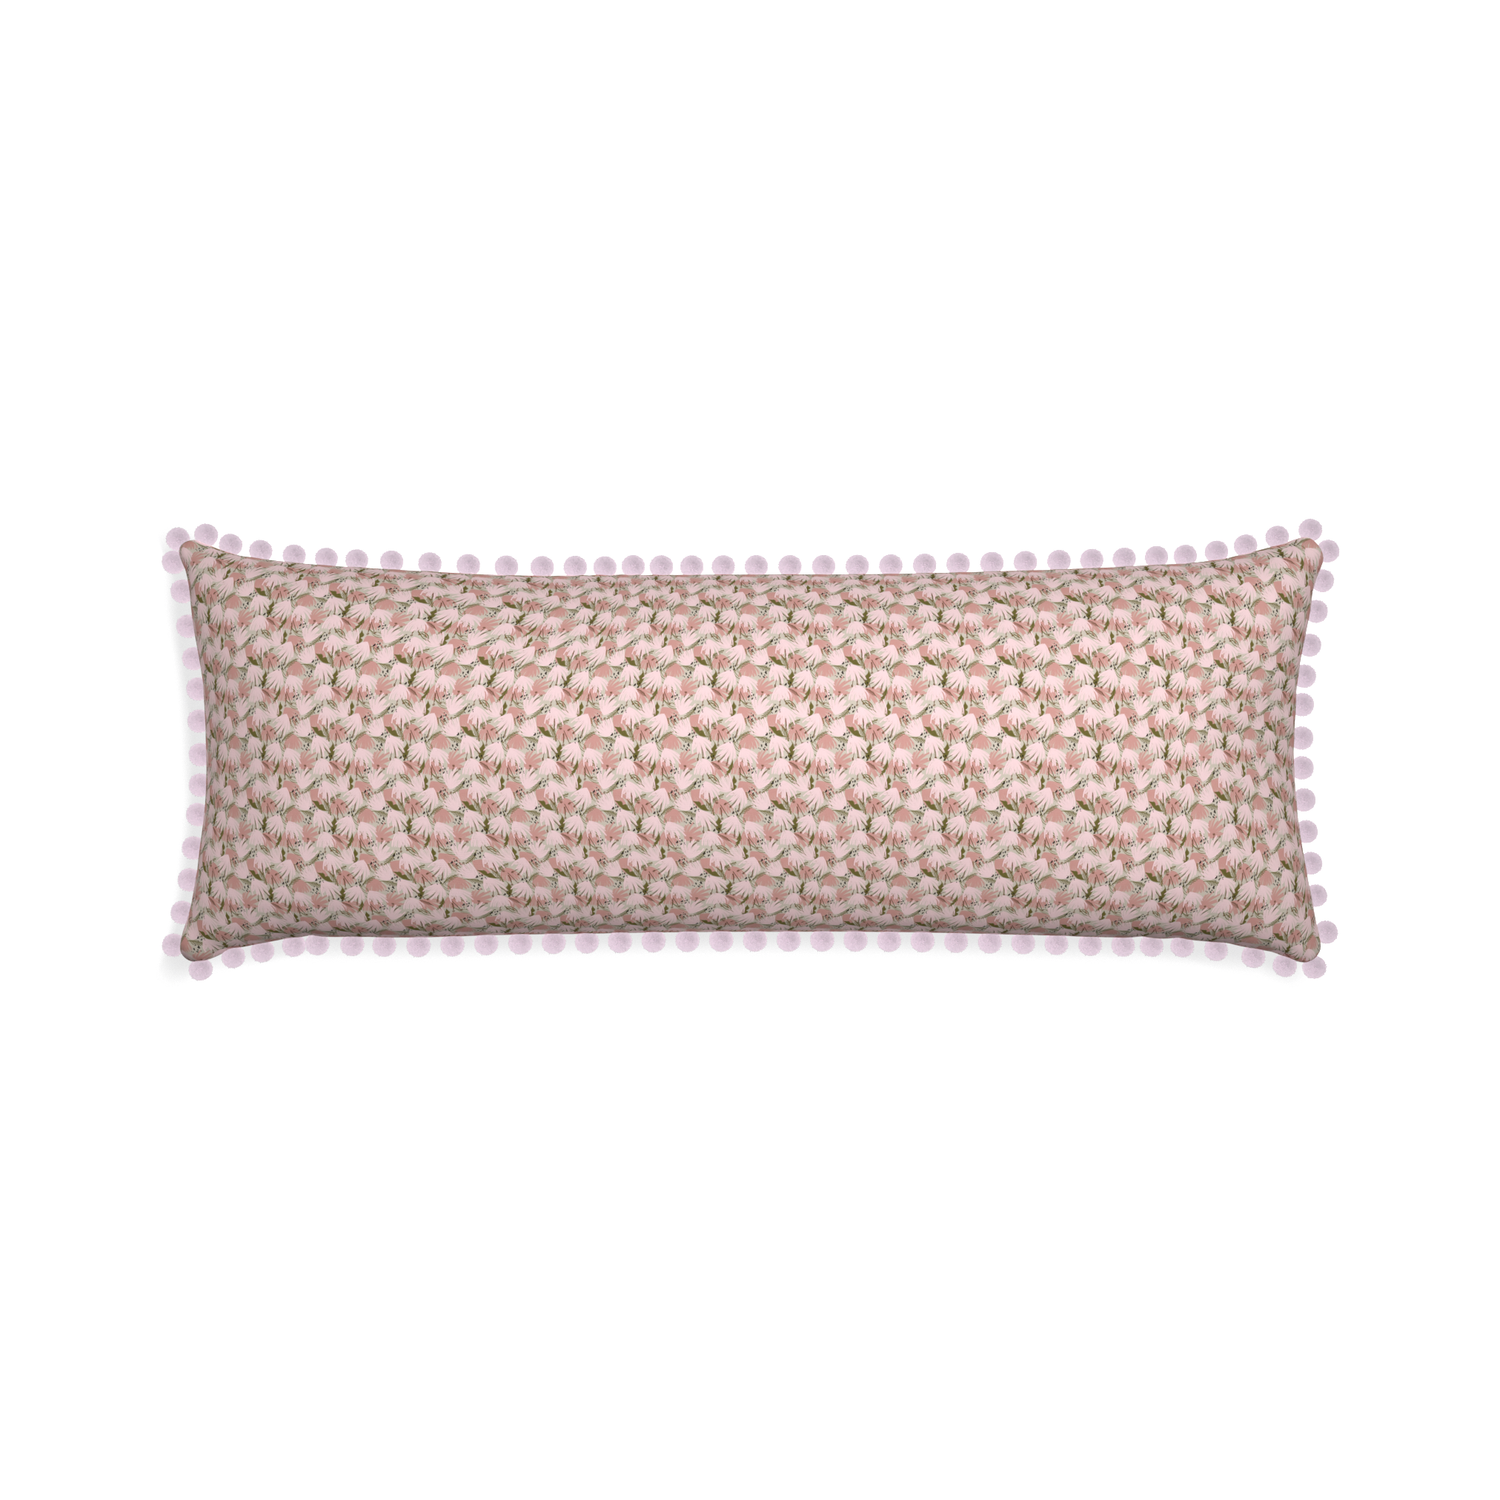 Xl-lumbar eden pink custom pink floralpillow with l on white background